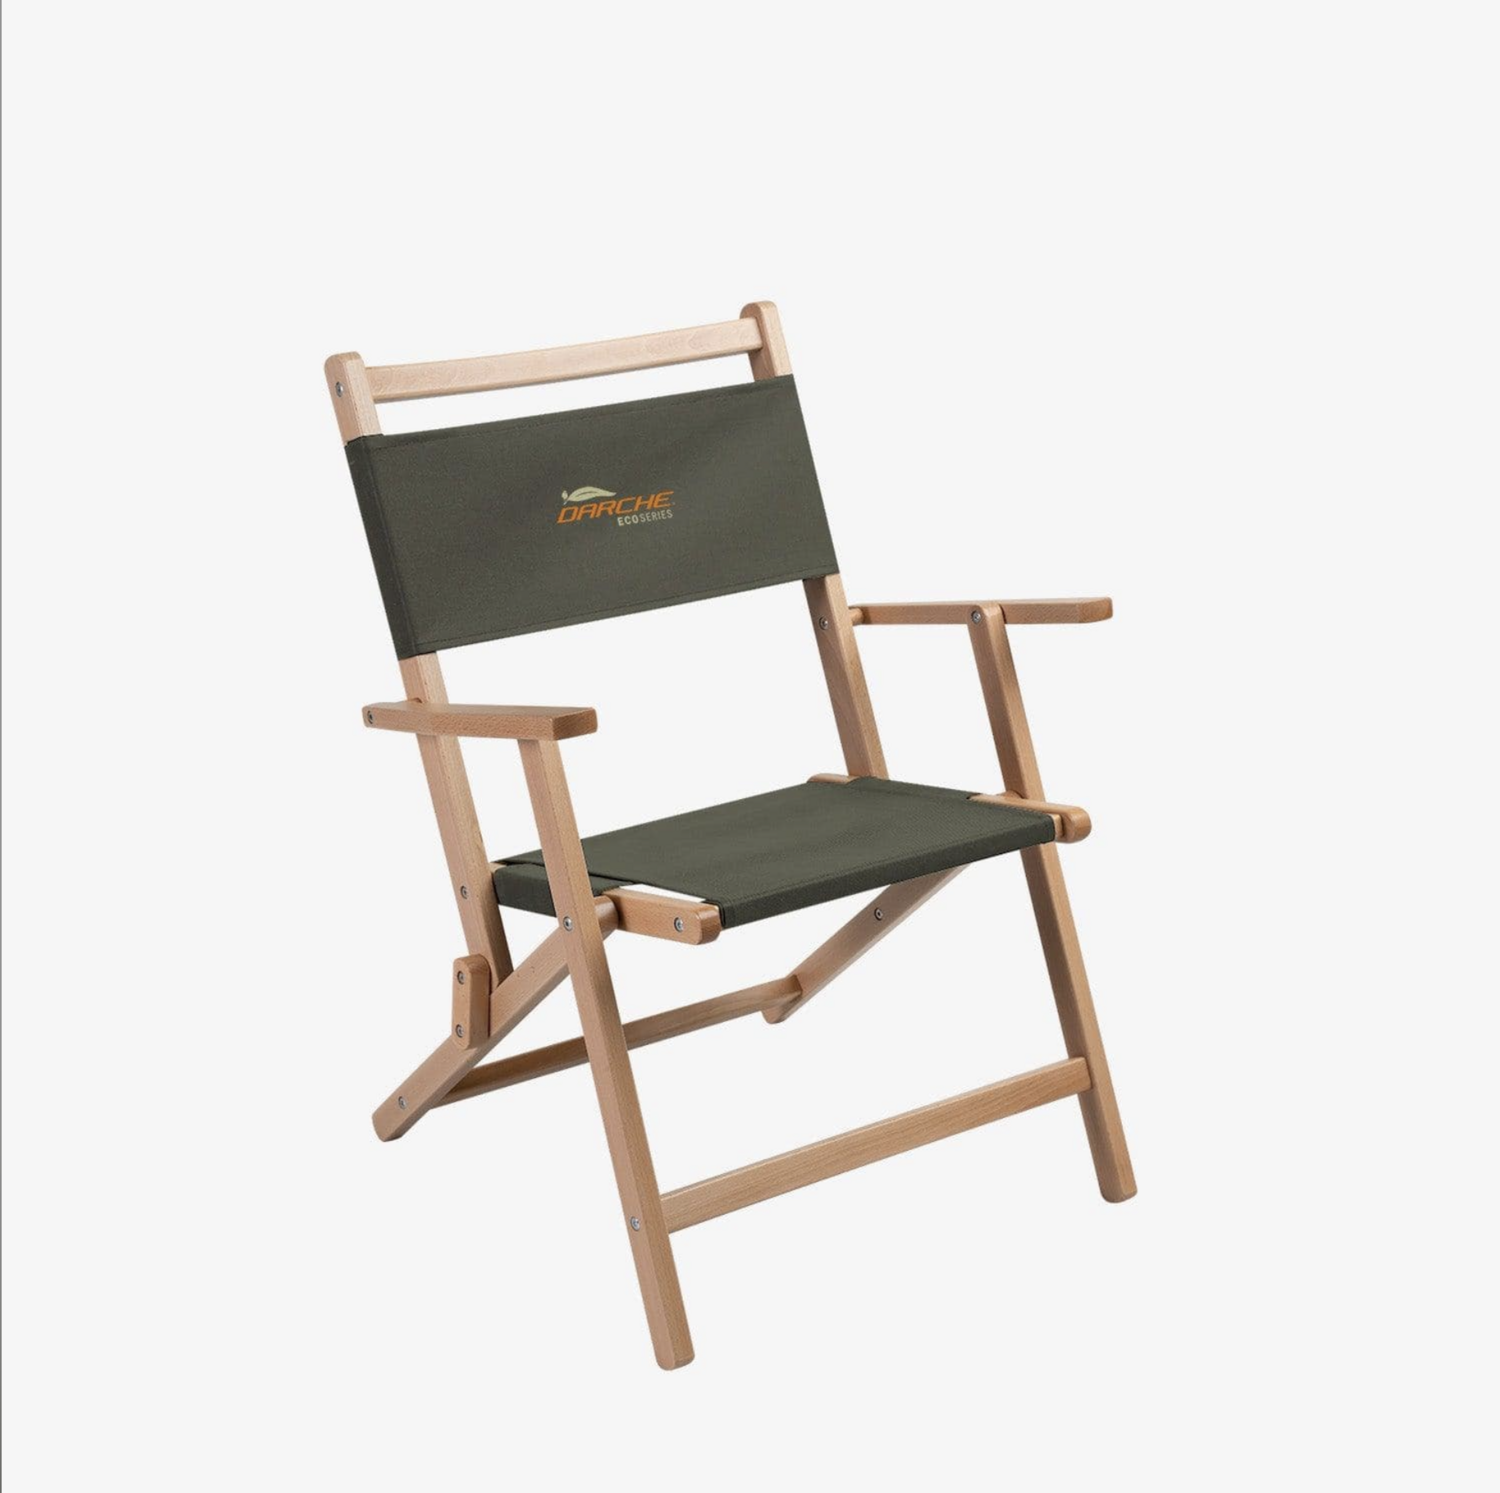 Eco Low Rise Folding Chair - by Darche